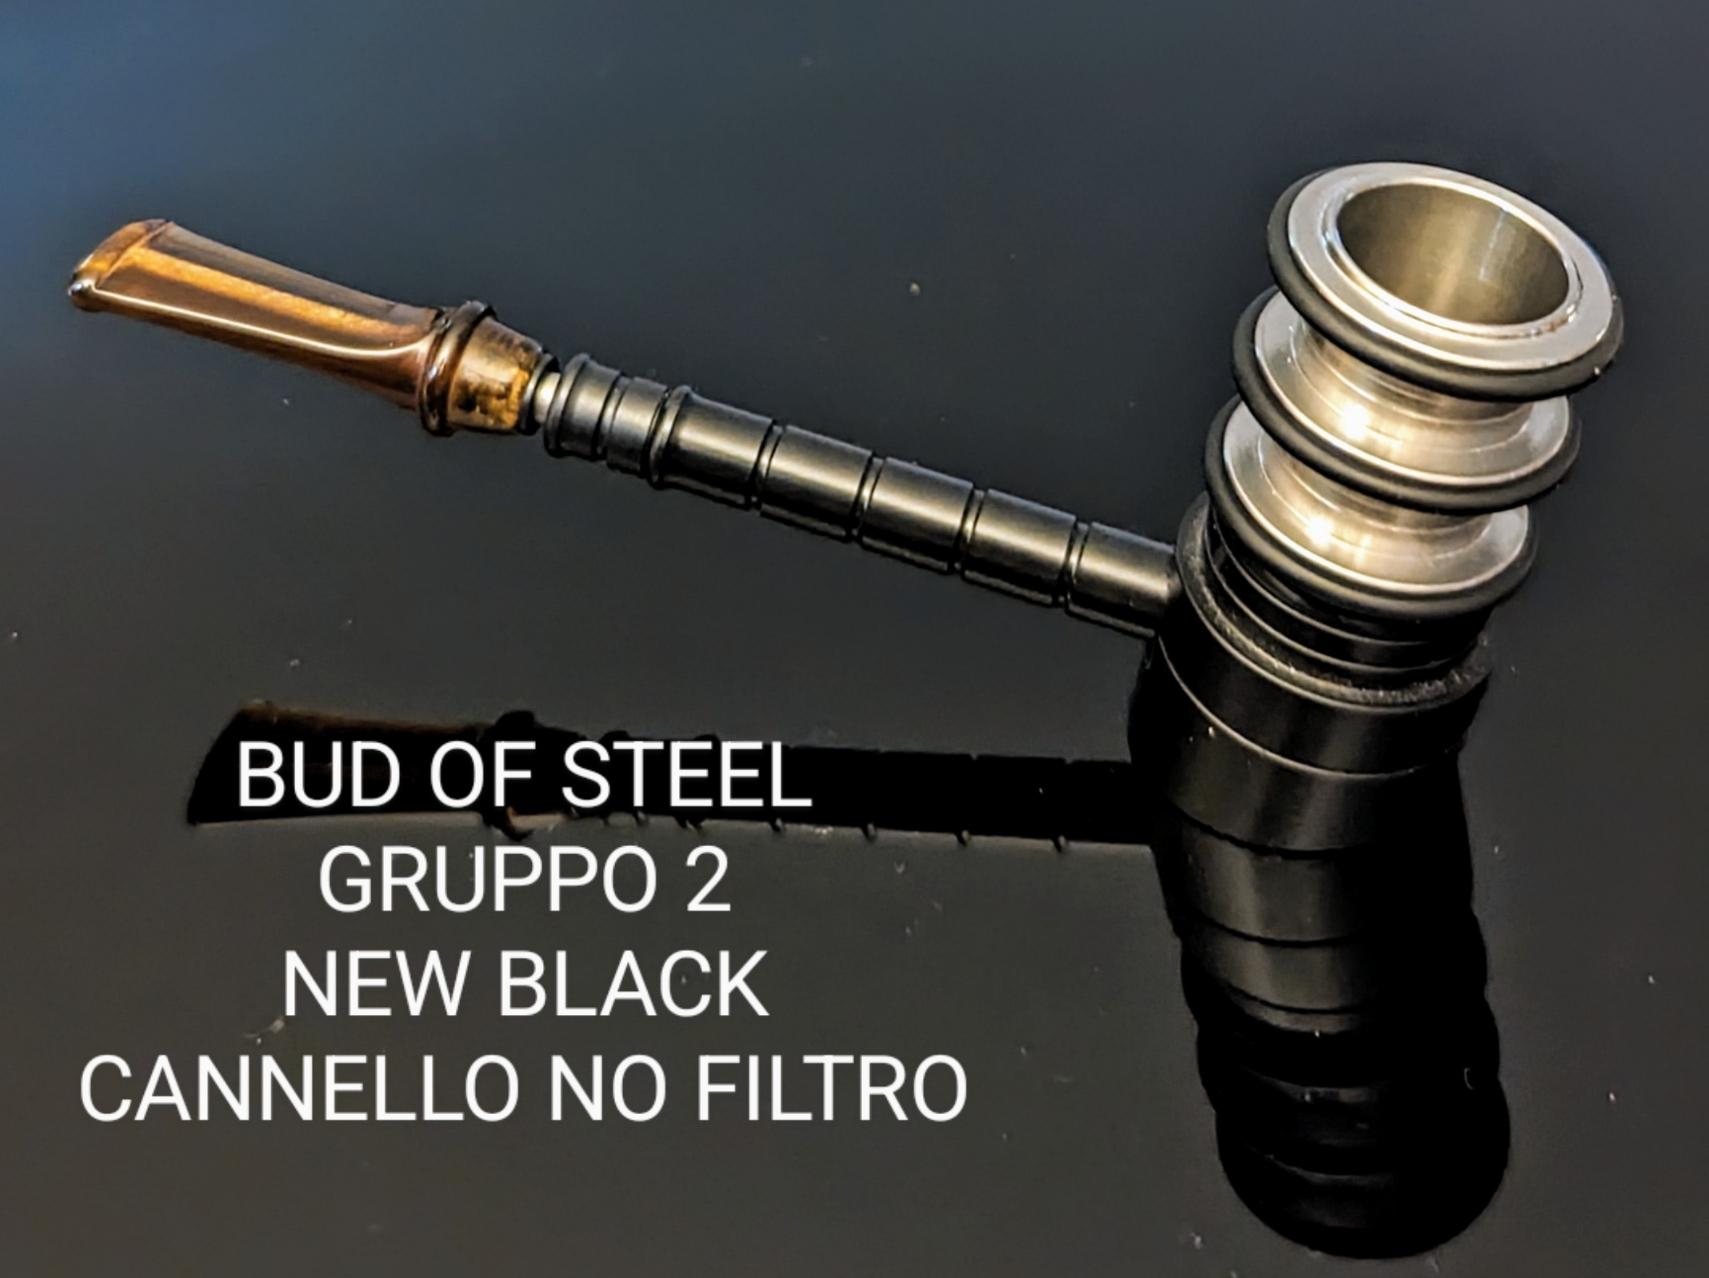 Job Pipe Bud Of Steel Gruppo 2 New black cannello (2 pipe in 1)